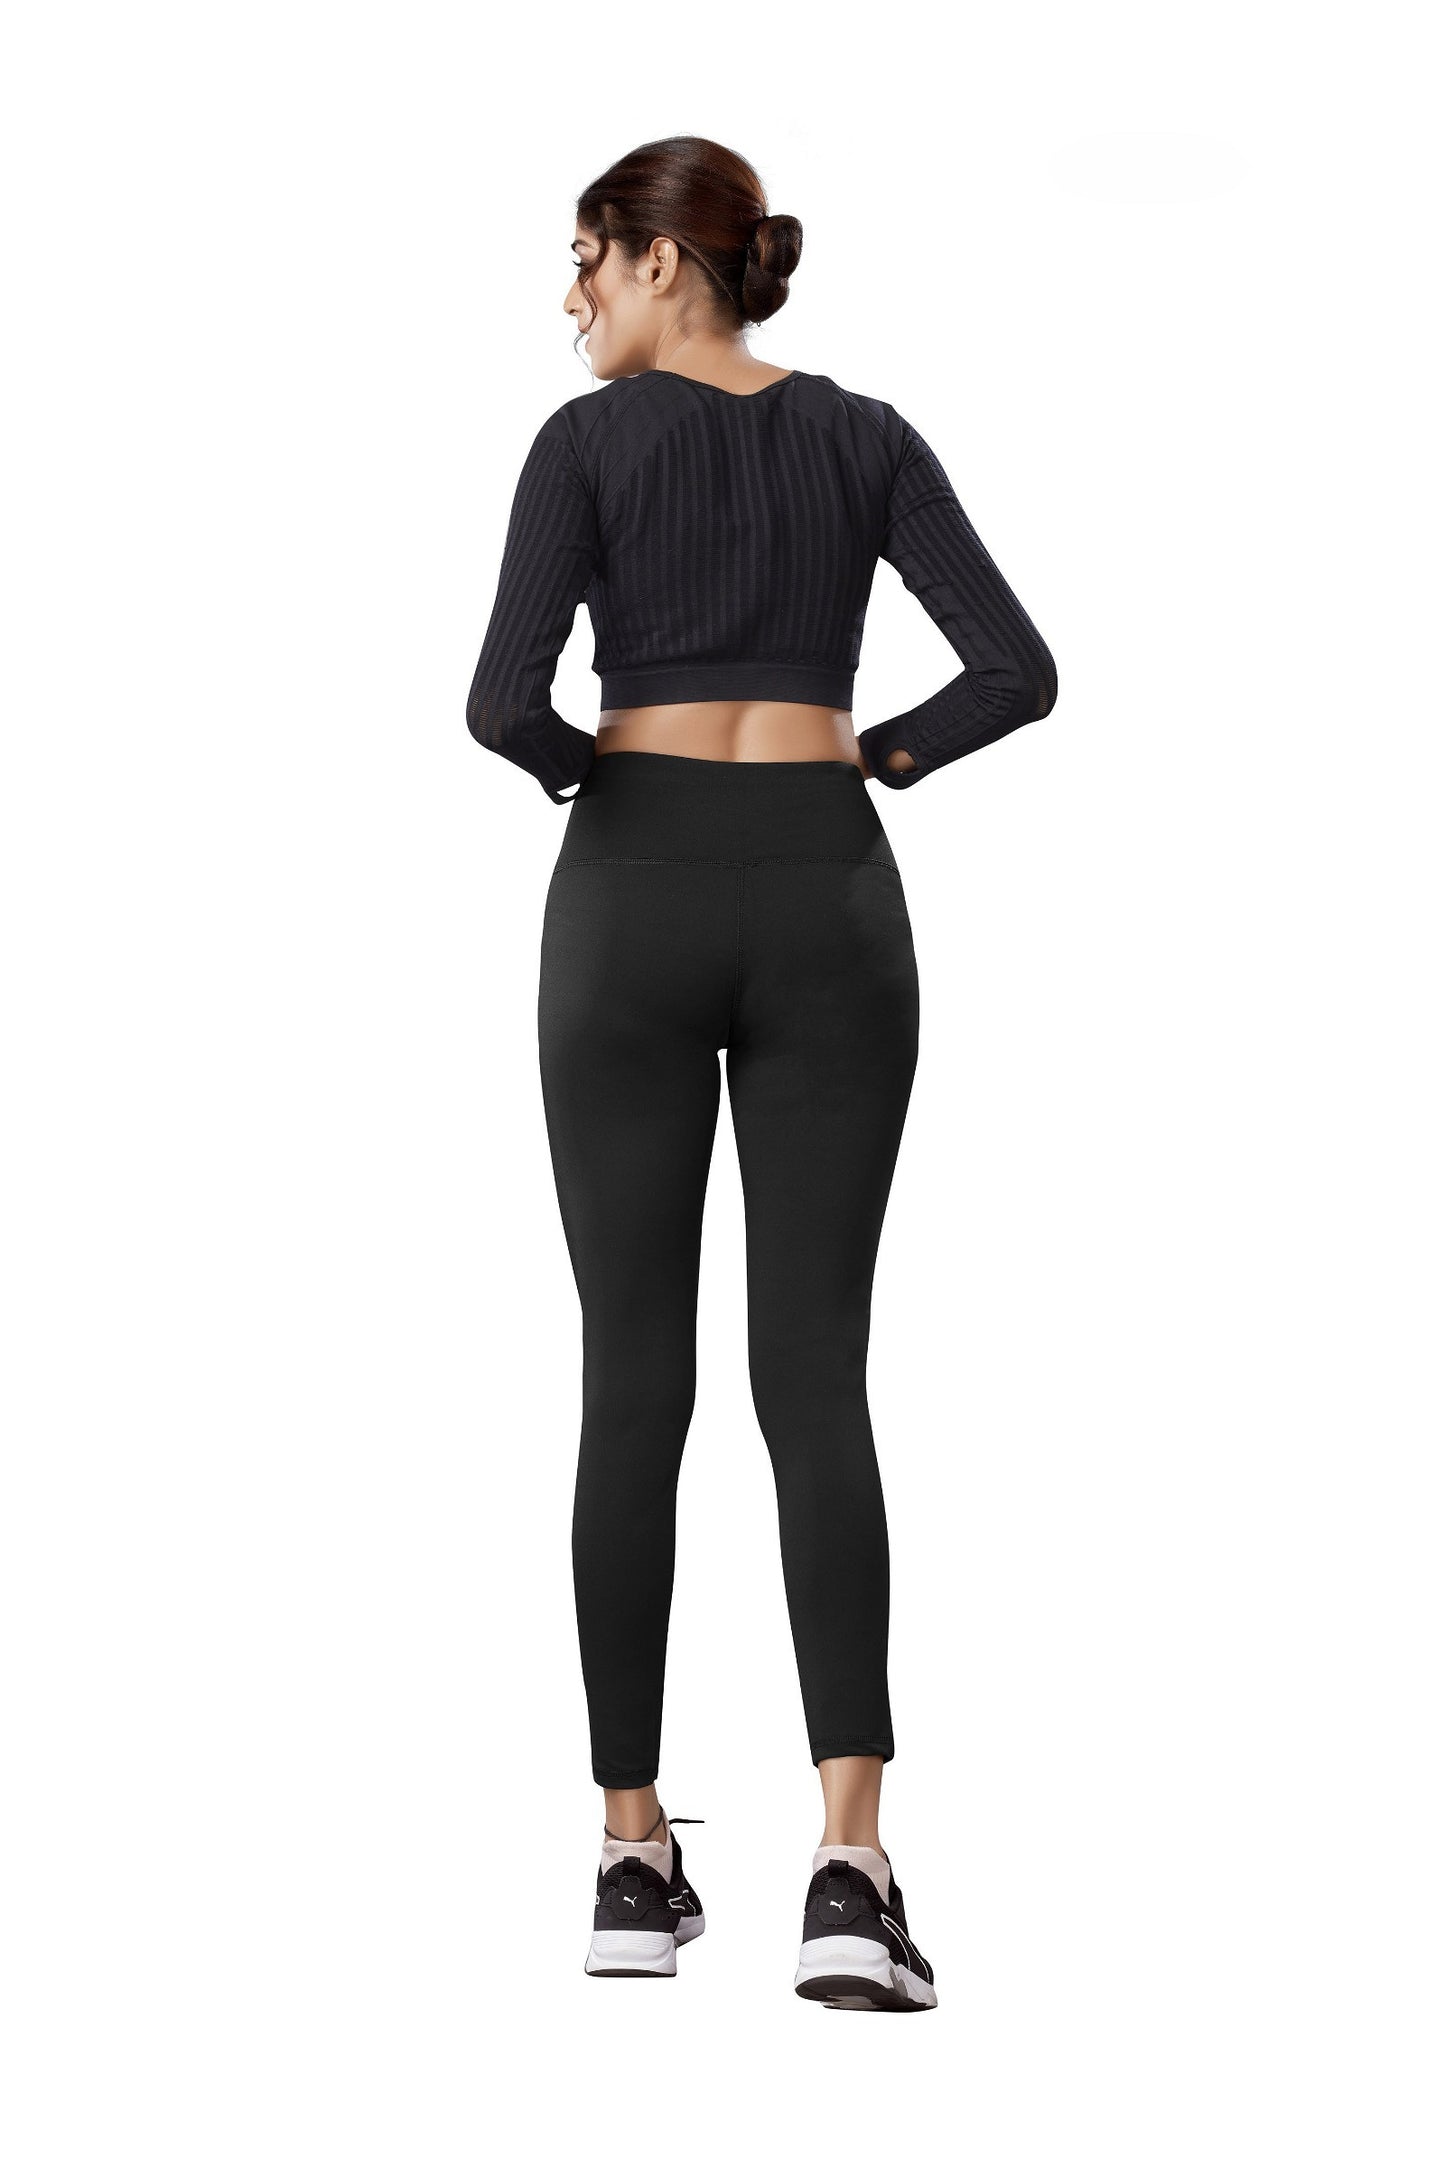 Black Colour Polyester Solid Pattern Track Pant For Women's